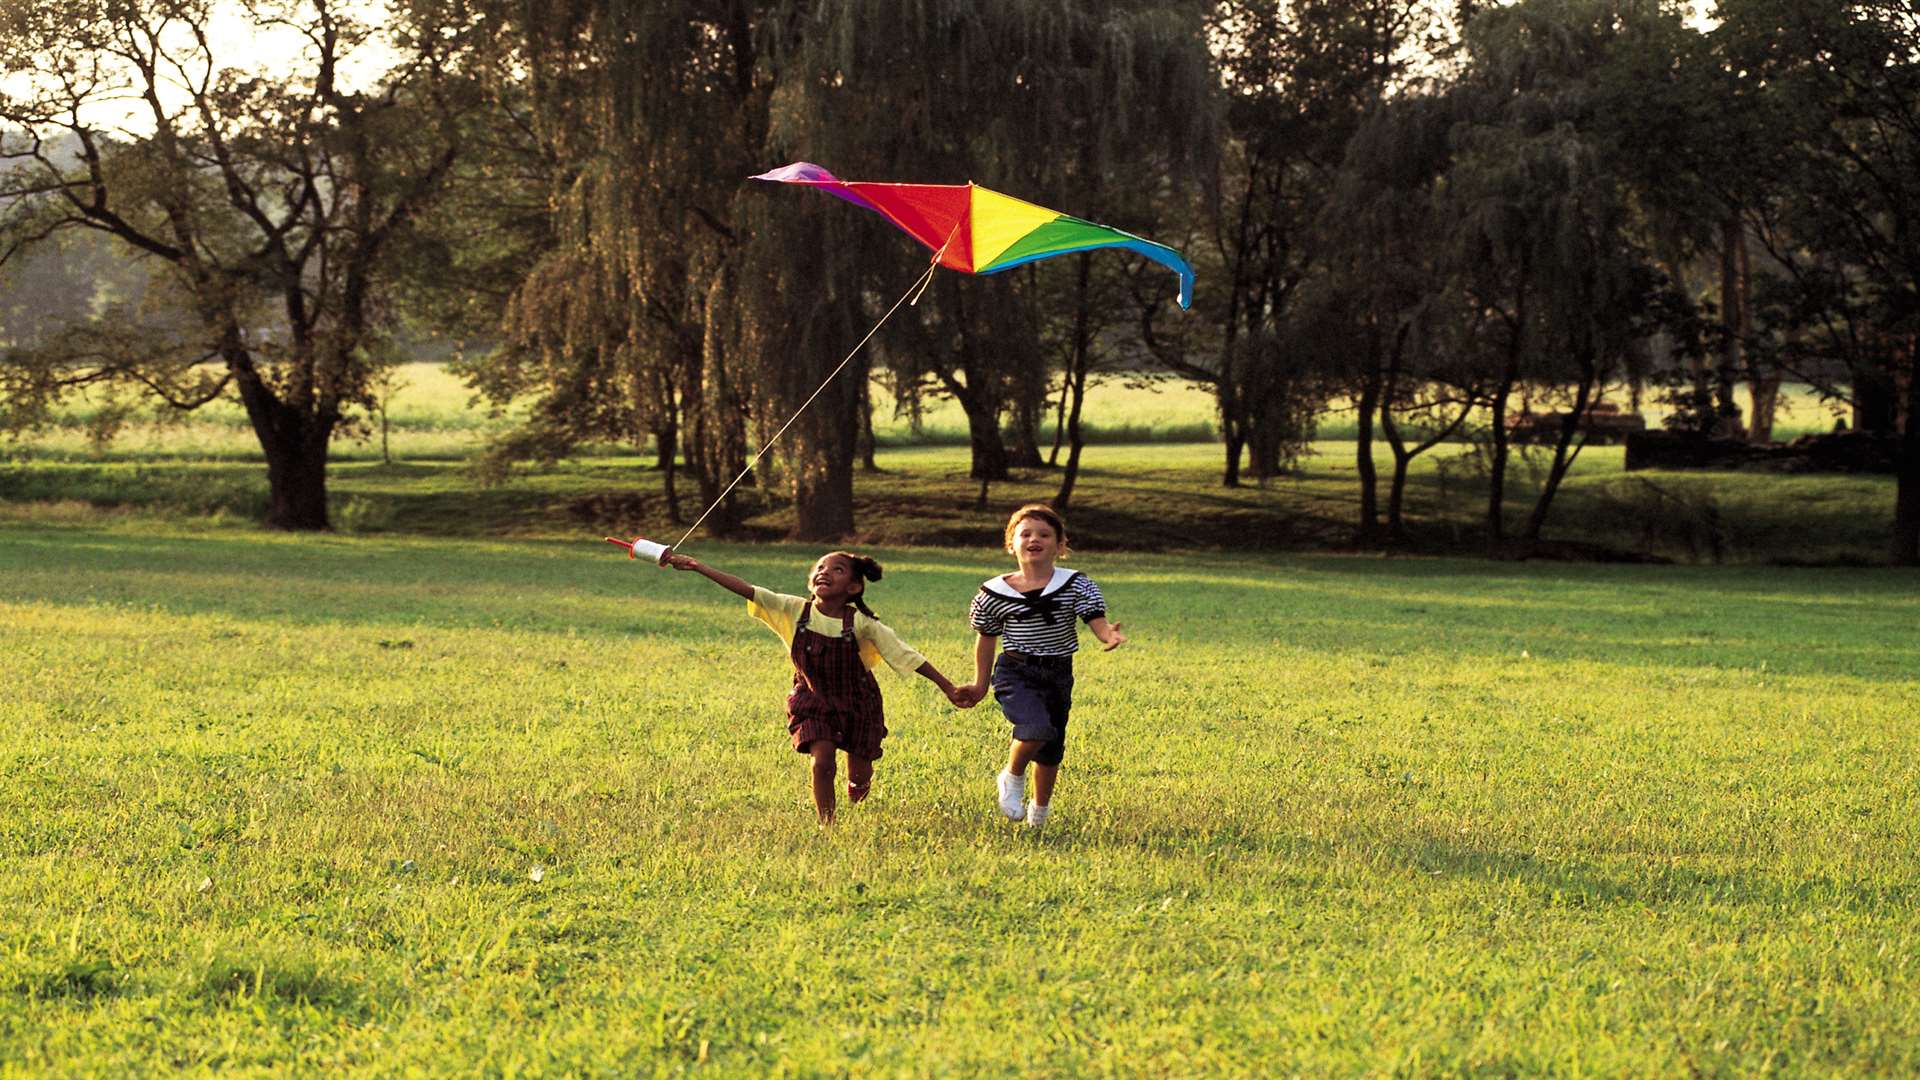 Kite flying will be on offer at Betteshanger Country Park's first Wind Festival